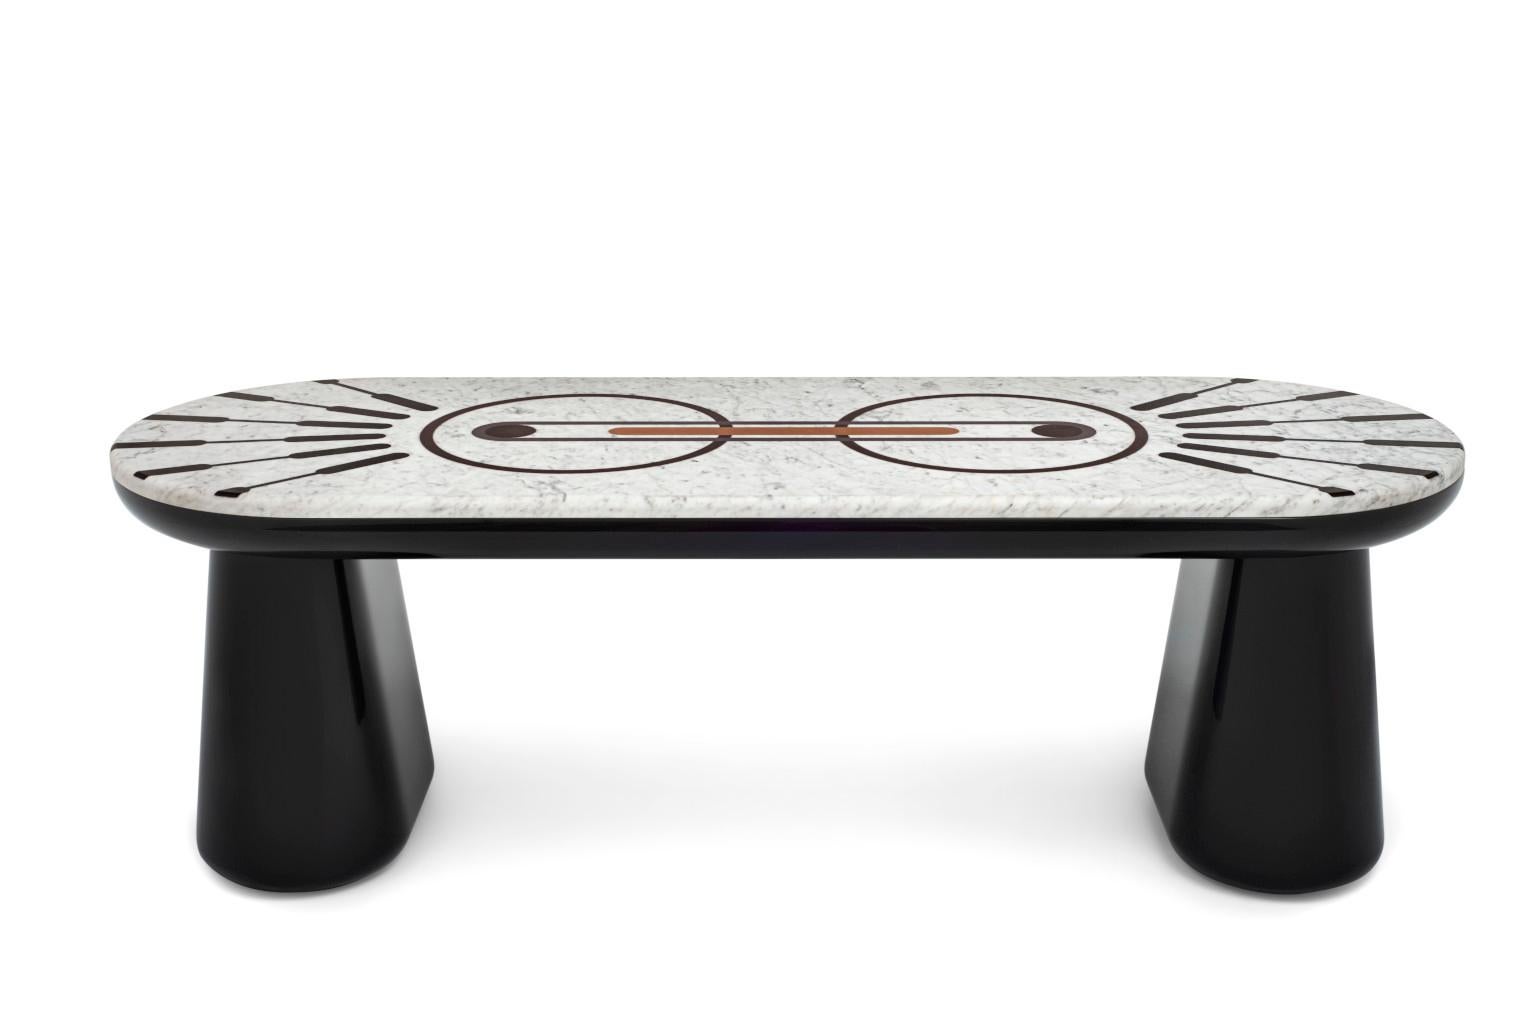 Ione Bench, design by Elena Salmistraro for Scapin Collezioni
Limited Edition.
New Atomic Age Collection

Ione was born from the encounter between smooth shapes and sophisticated graphic carvings. Circles, lines and orbits blended together give life